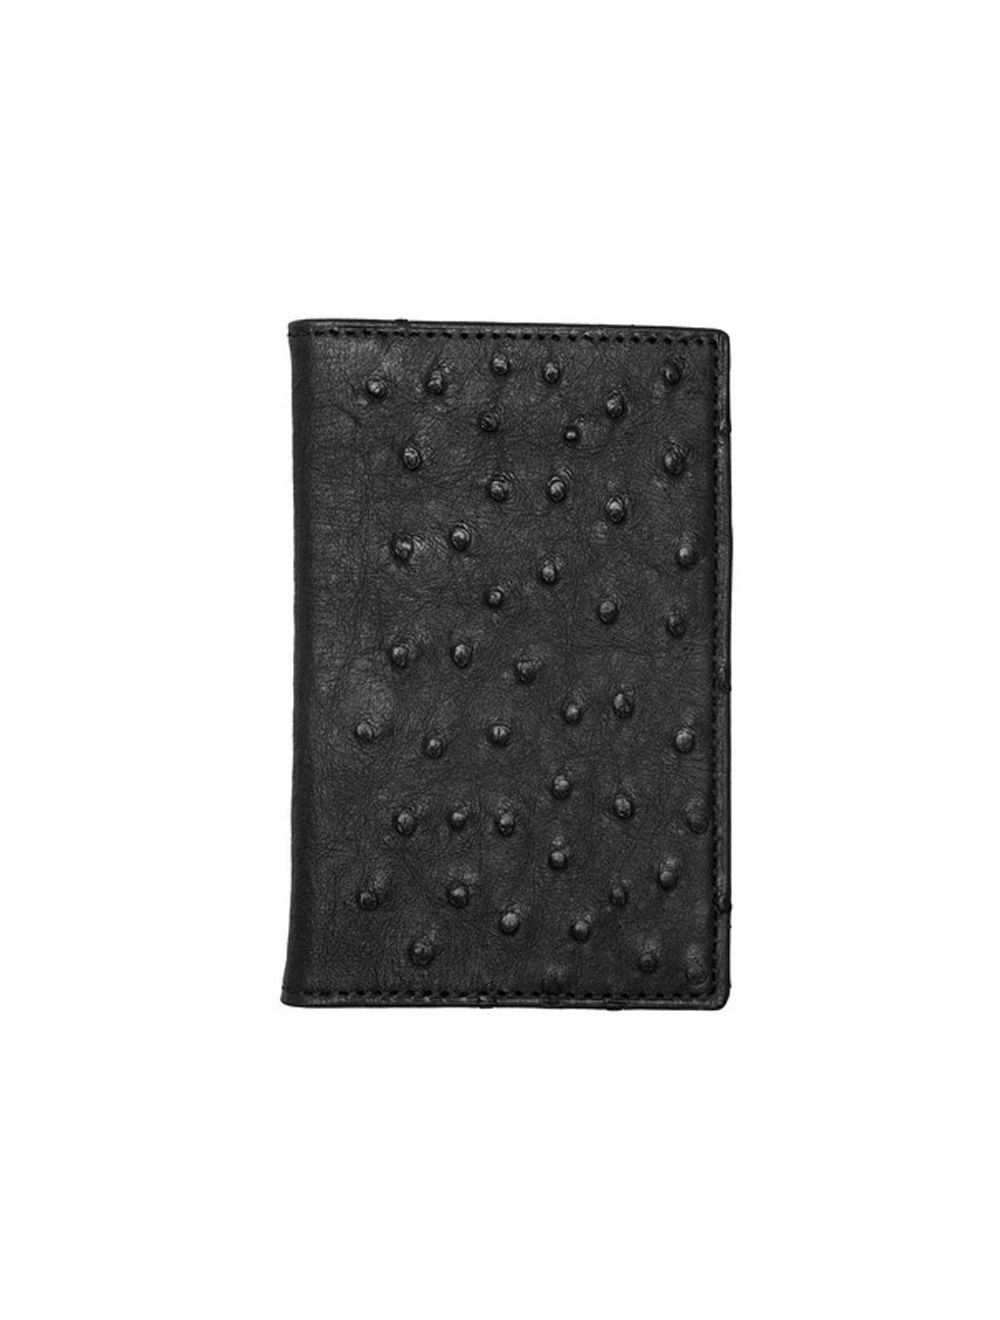 ostrich leather wallet